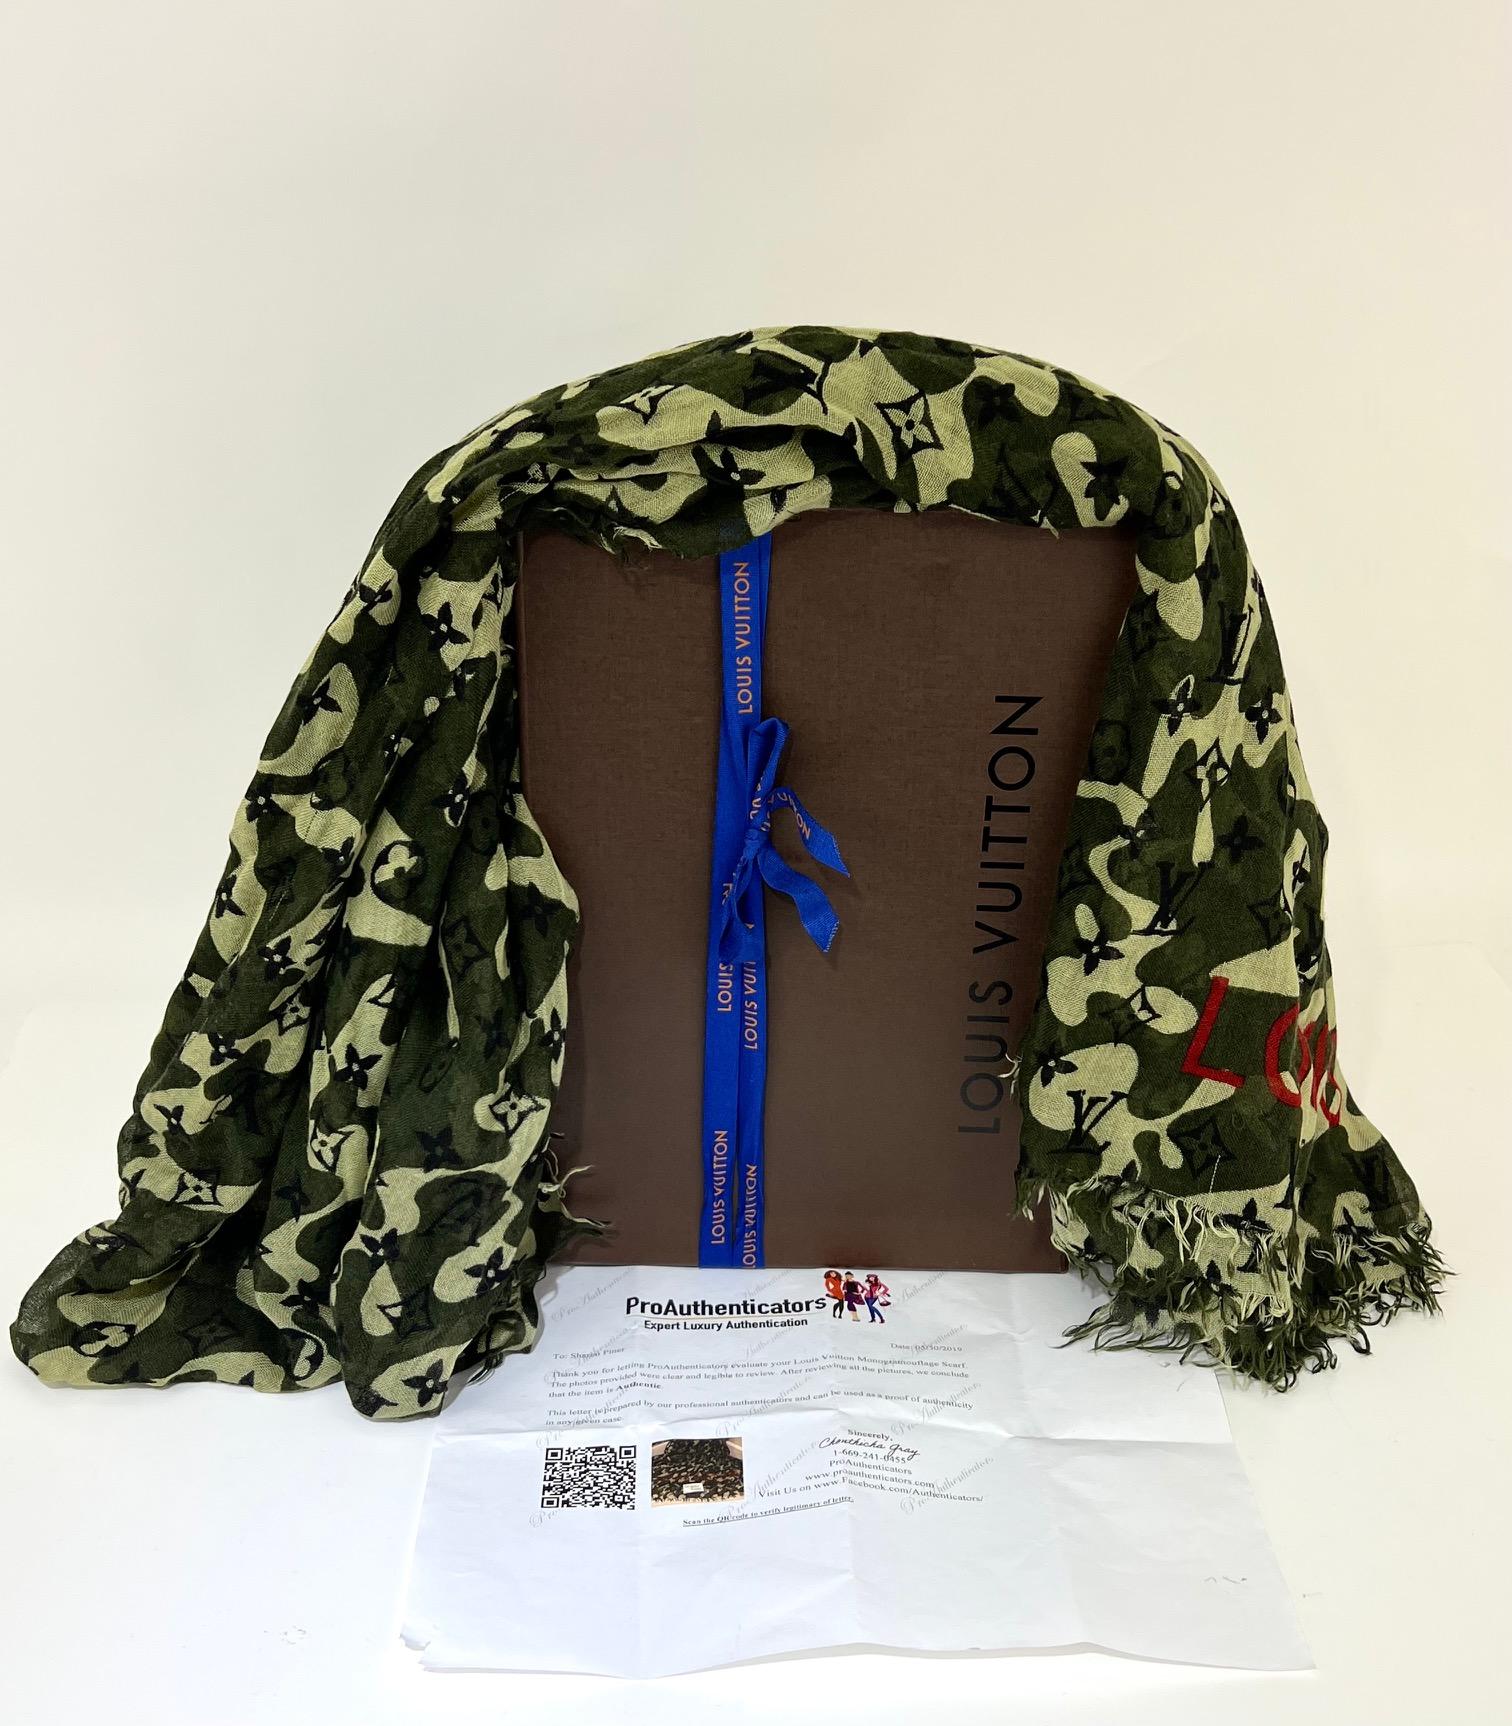 Pre-Owned  100% Authentic
LOUIS VUITTON TAKASHI MURAKAMI
Monogramouflage Camouflage Shawl Scarf,
Wear this Stand Out Louis Vuitton many
different ways, Can even be put on end of
bed or chair.
RATING: B...Very Good, well maintained,
shows minor signs